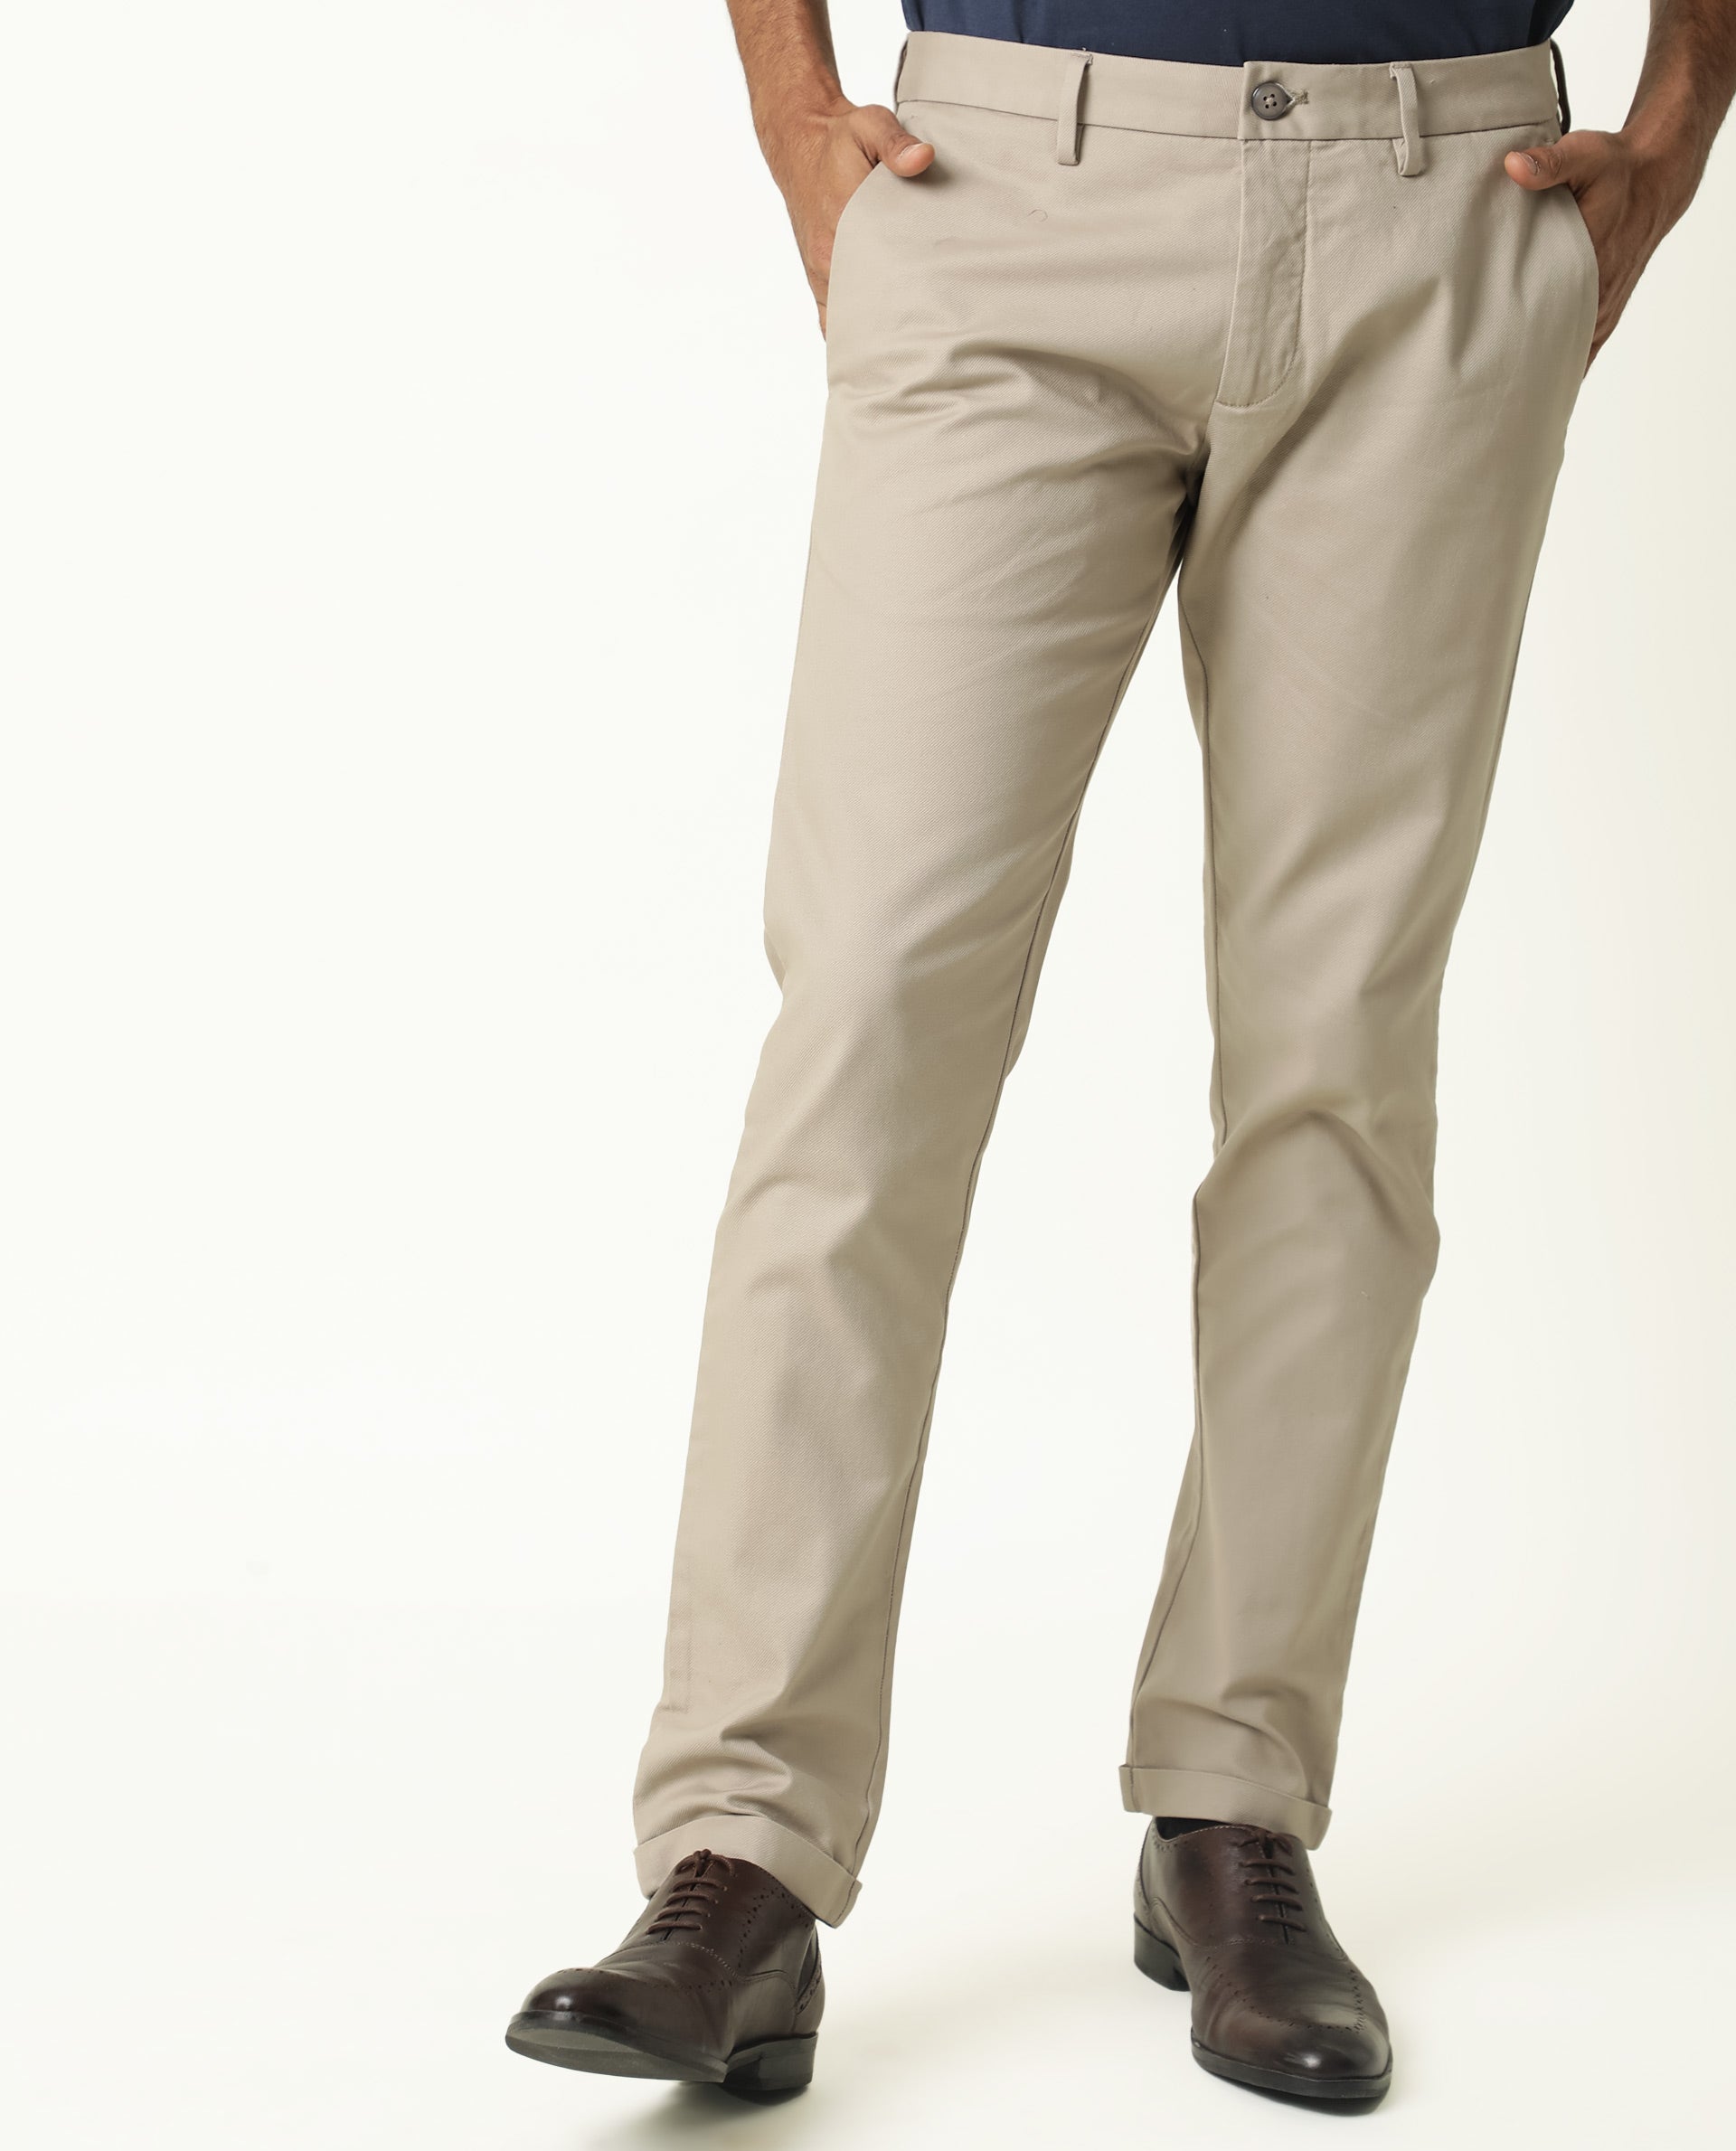 Raw Materials Requirement for Making Mens Formal Trousers